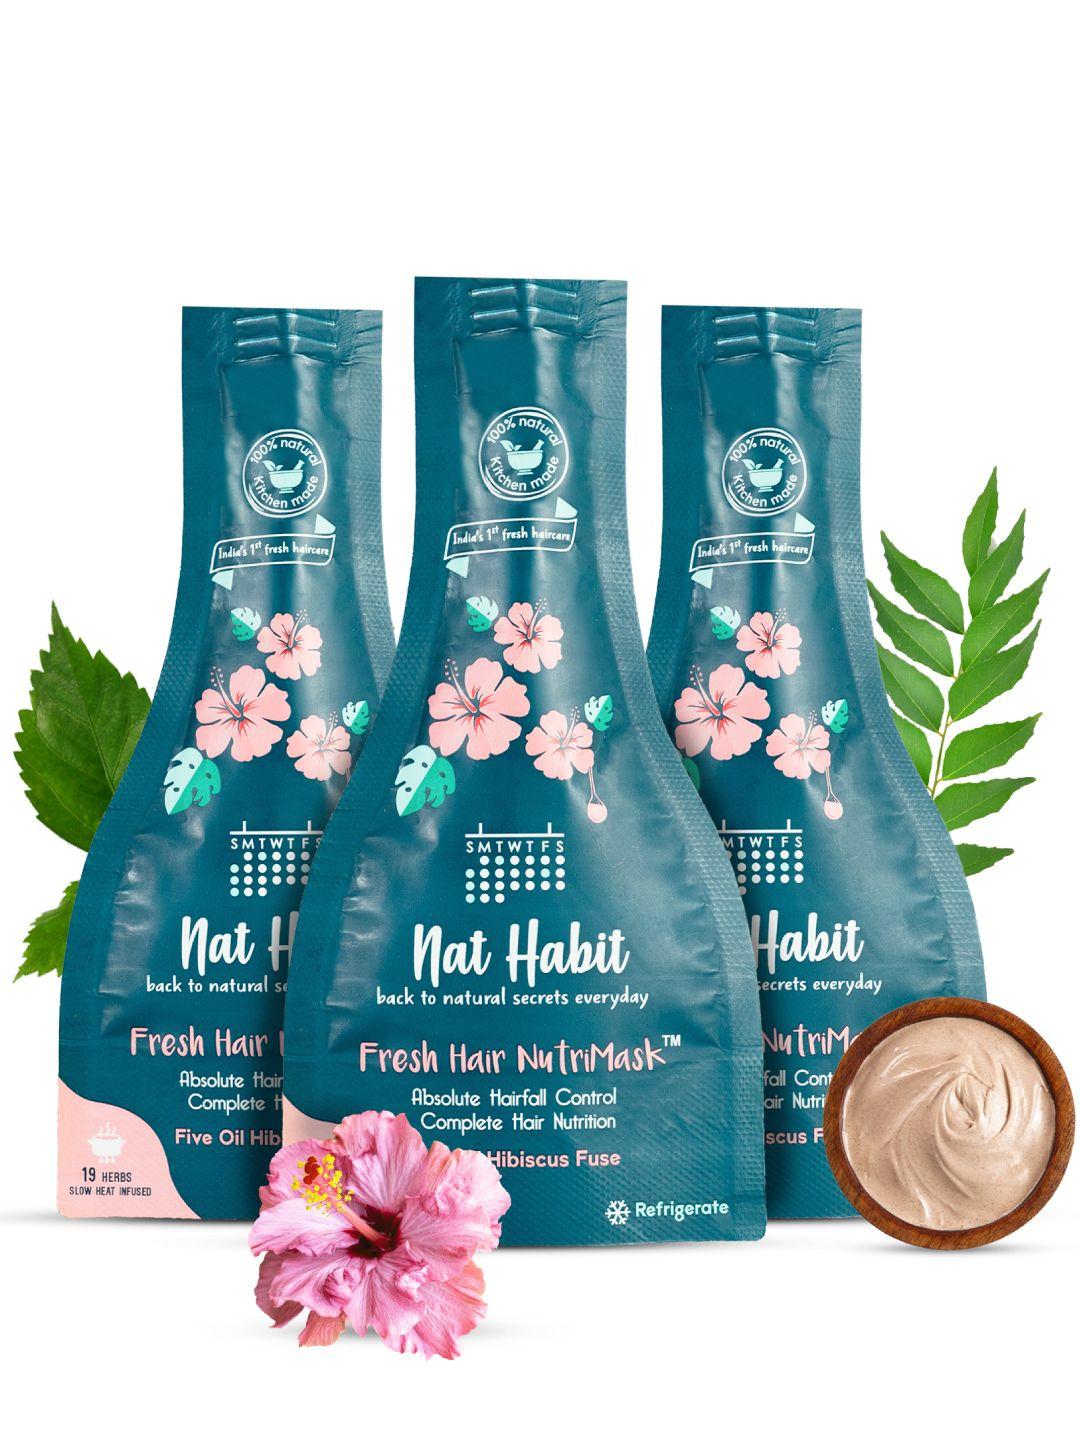 nat habit set of 3 five oil hibiscus hair nutrimask for hair growth - 40 g each